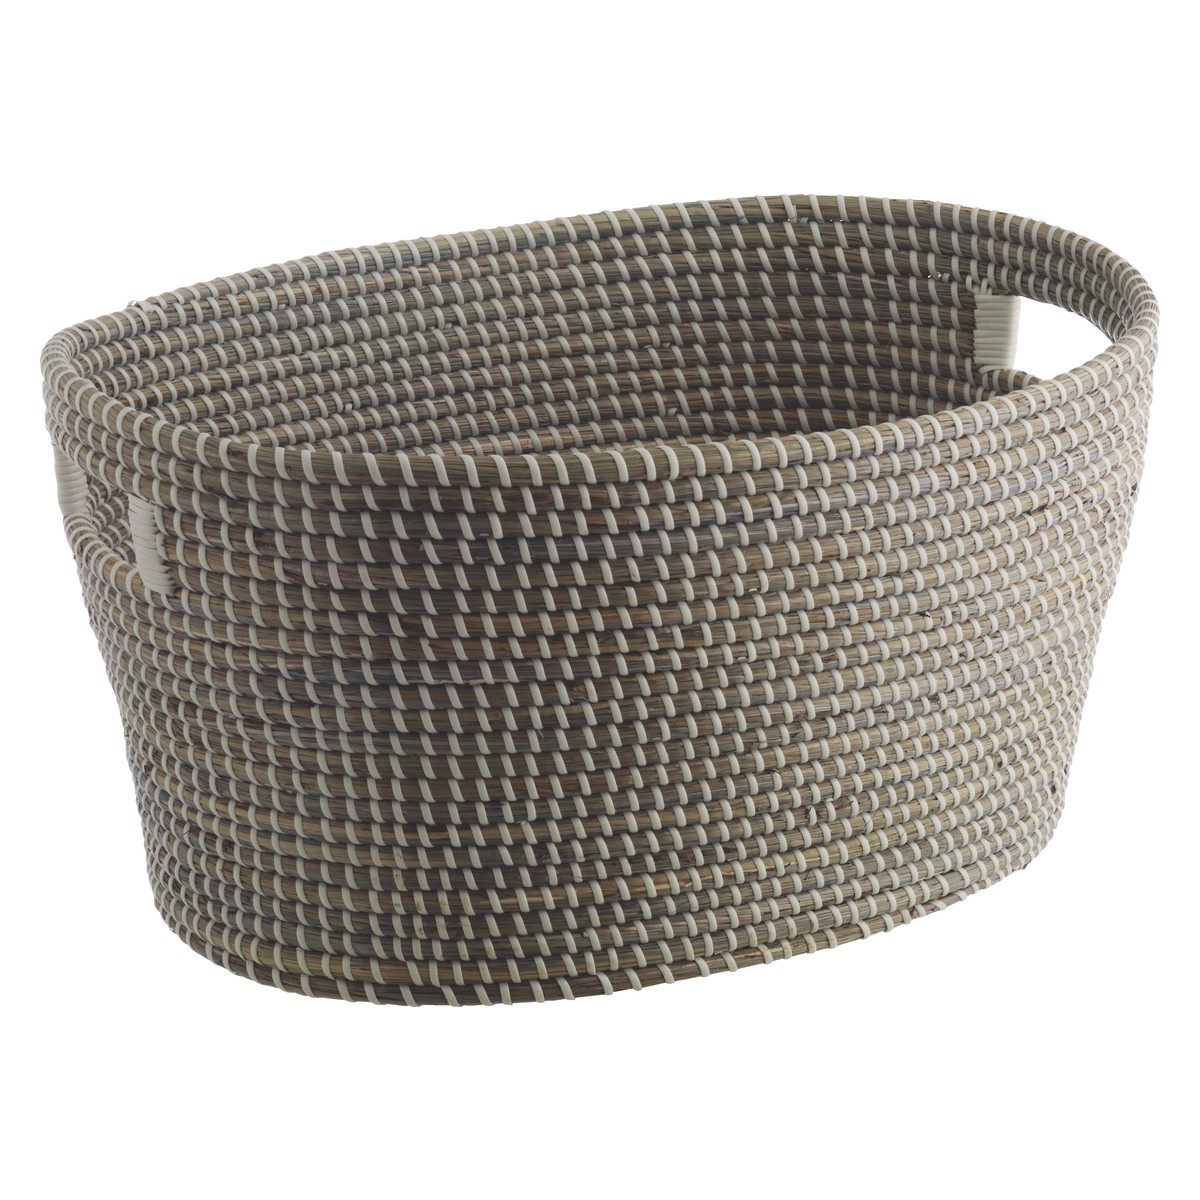 MORRIS Grey woven laundry basket with handles